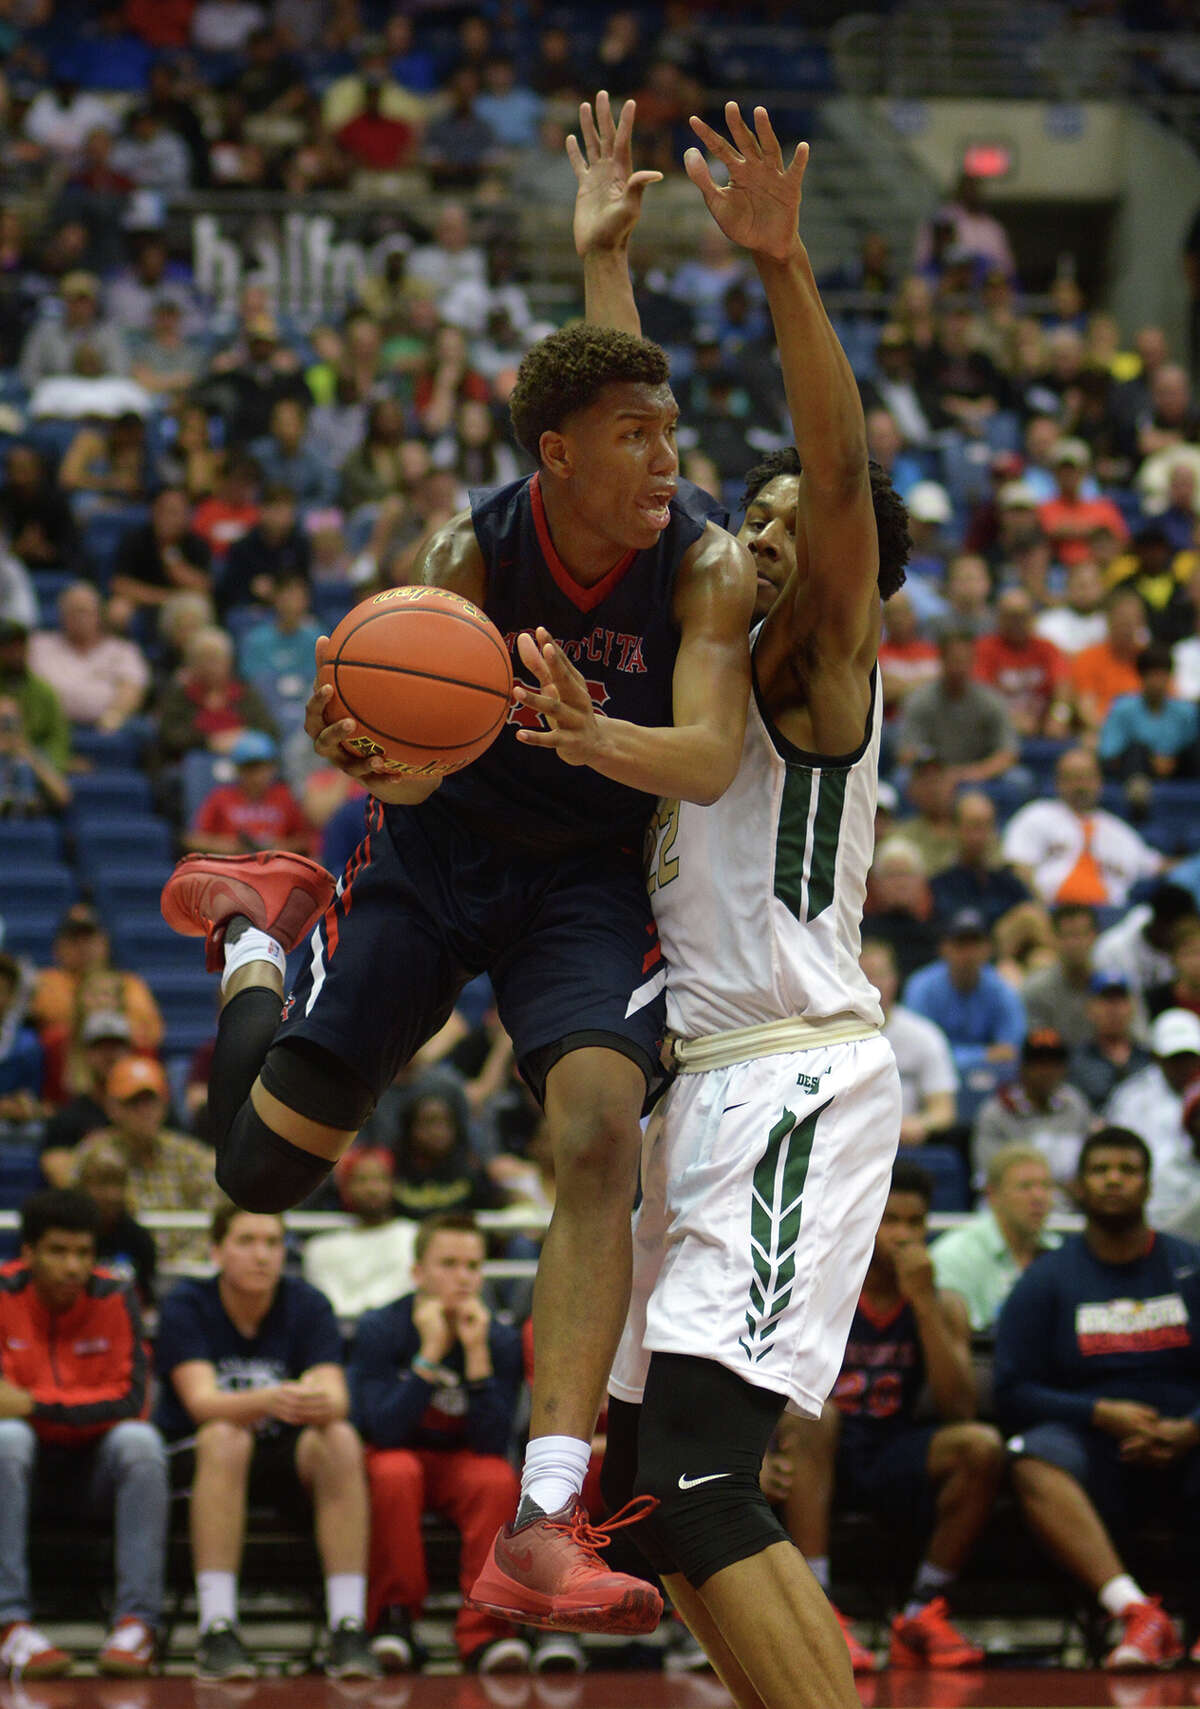 Atascocita junior forward Fabian White, left, battles for a shot against Desoto senior center Marques Bolden late in the 4th quarter of their Class 6A boys basketball state championship game at the Alamodome in San Antonio on Saturday, Mar. 12, 2016. (Photo by Jerry Baker/Freelance)